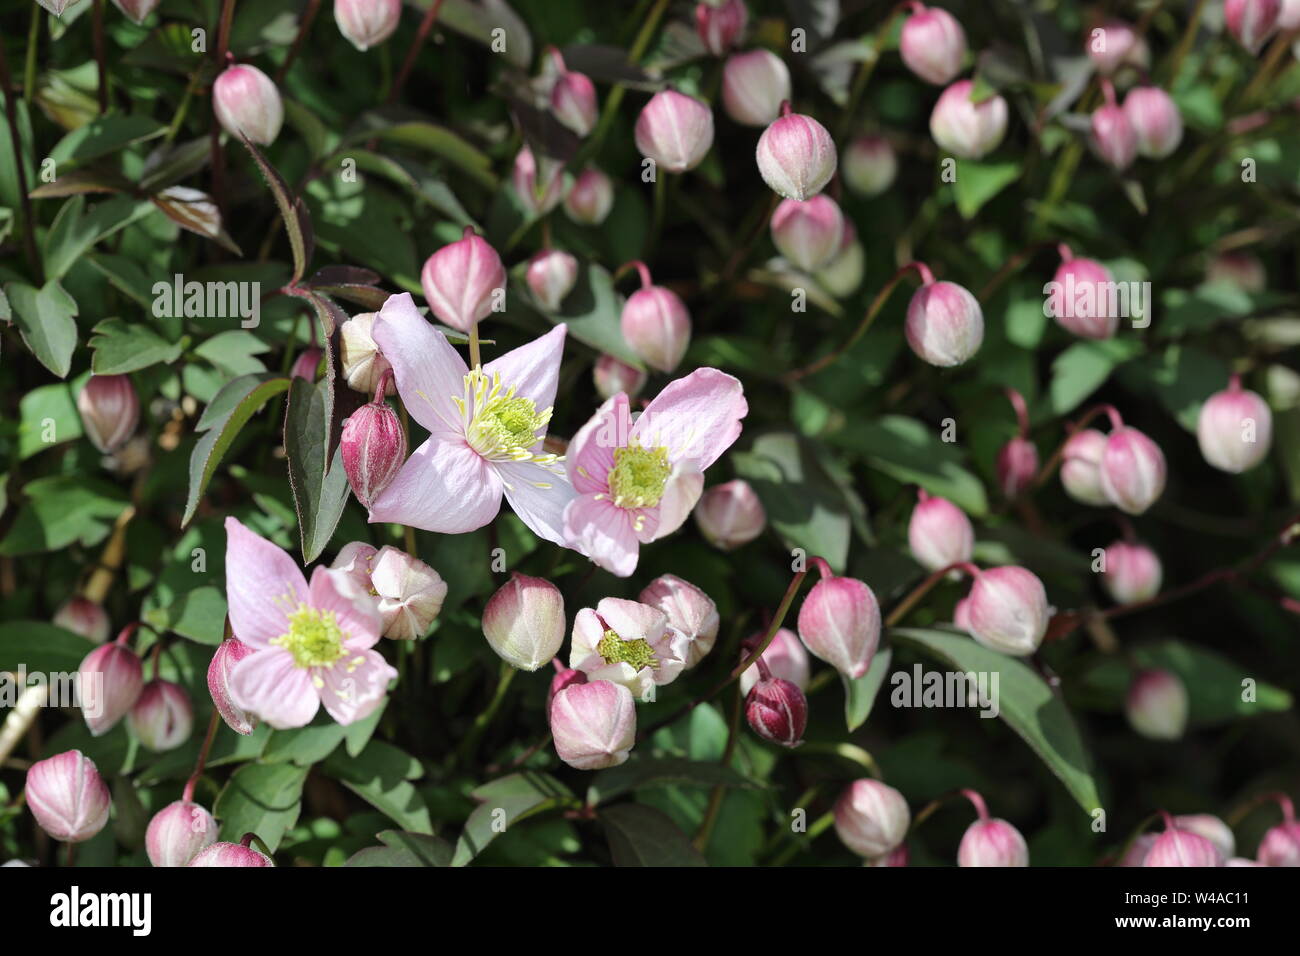 Open flower heads and buds of Clematis Montana Wilsonii Stock Photo